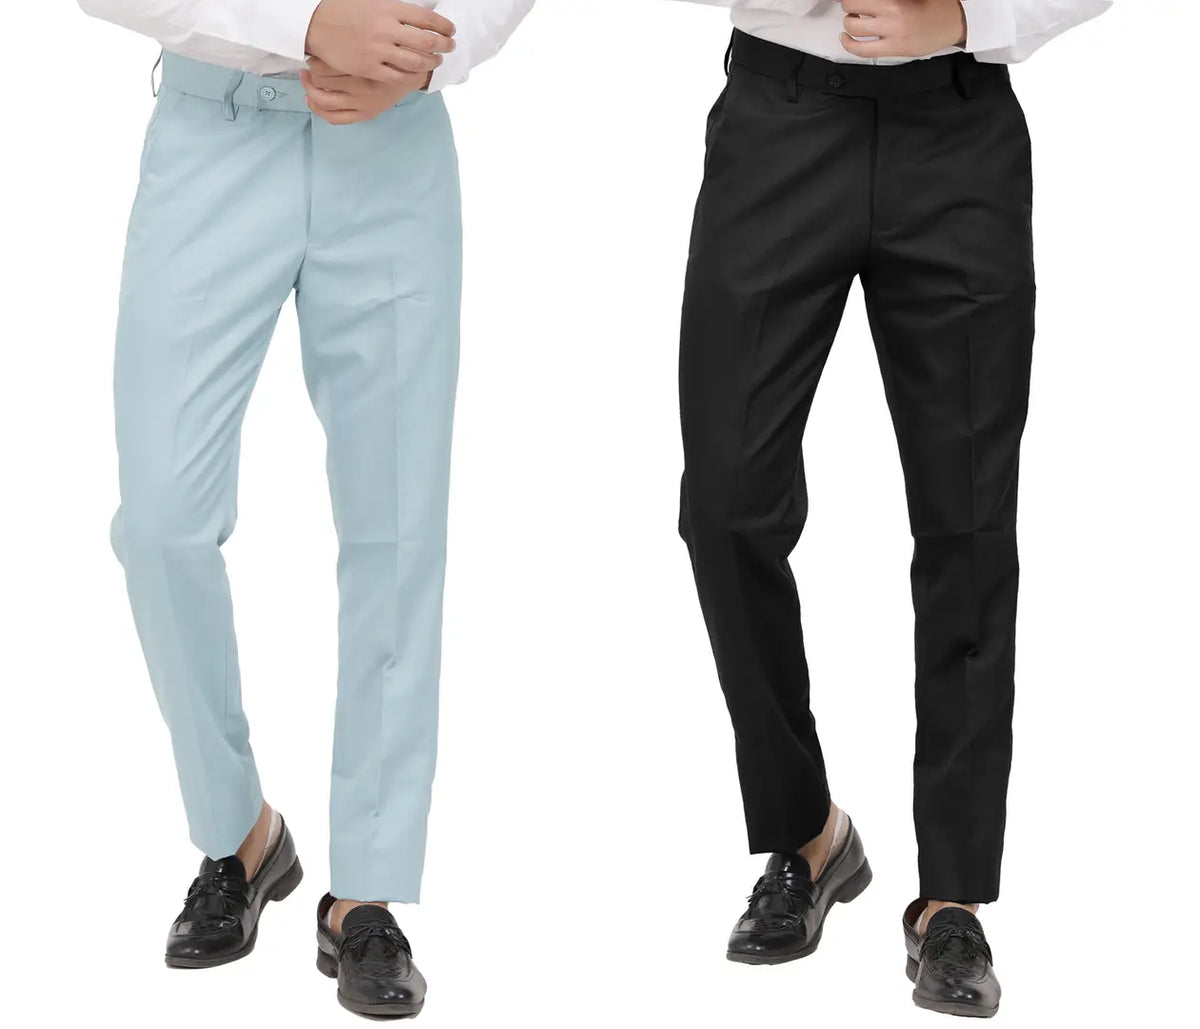 Kundan Men Poly-Viscose Blended Light Sky Blue and Black Formal Trousers ( Pack of 2 Trousers )